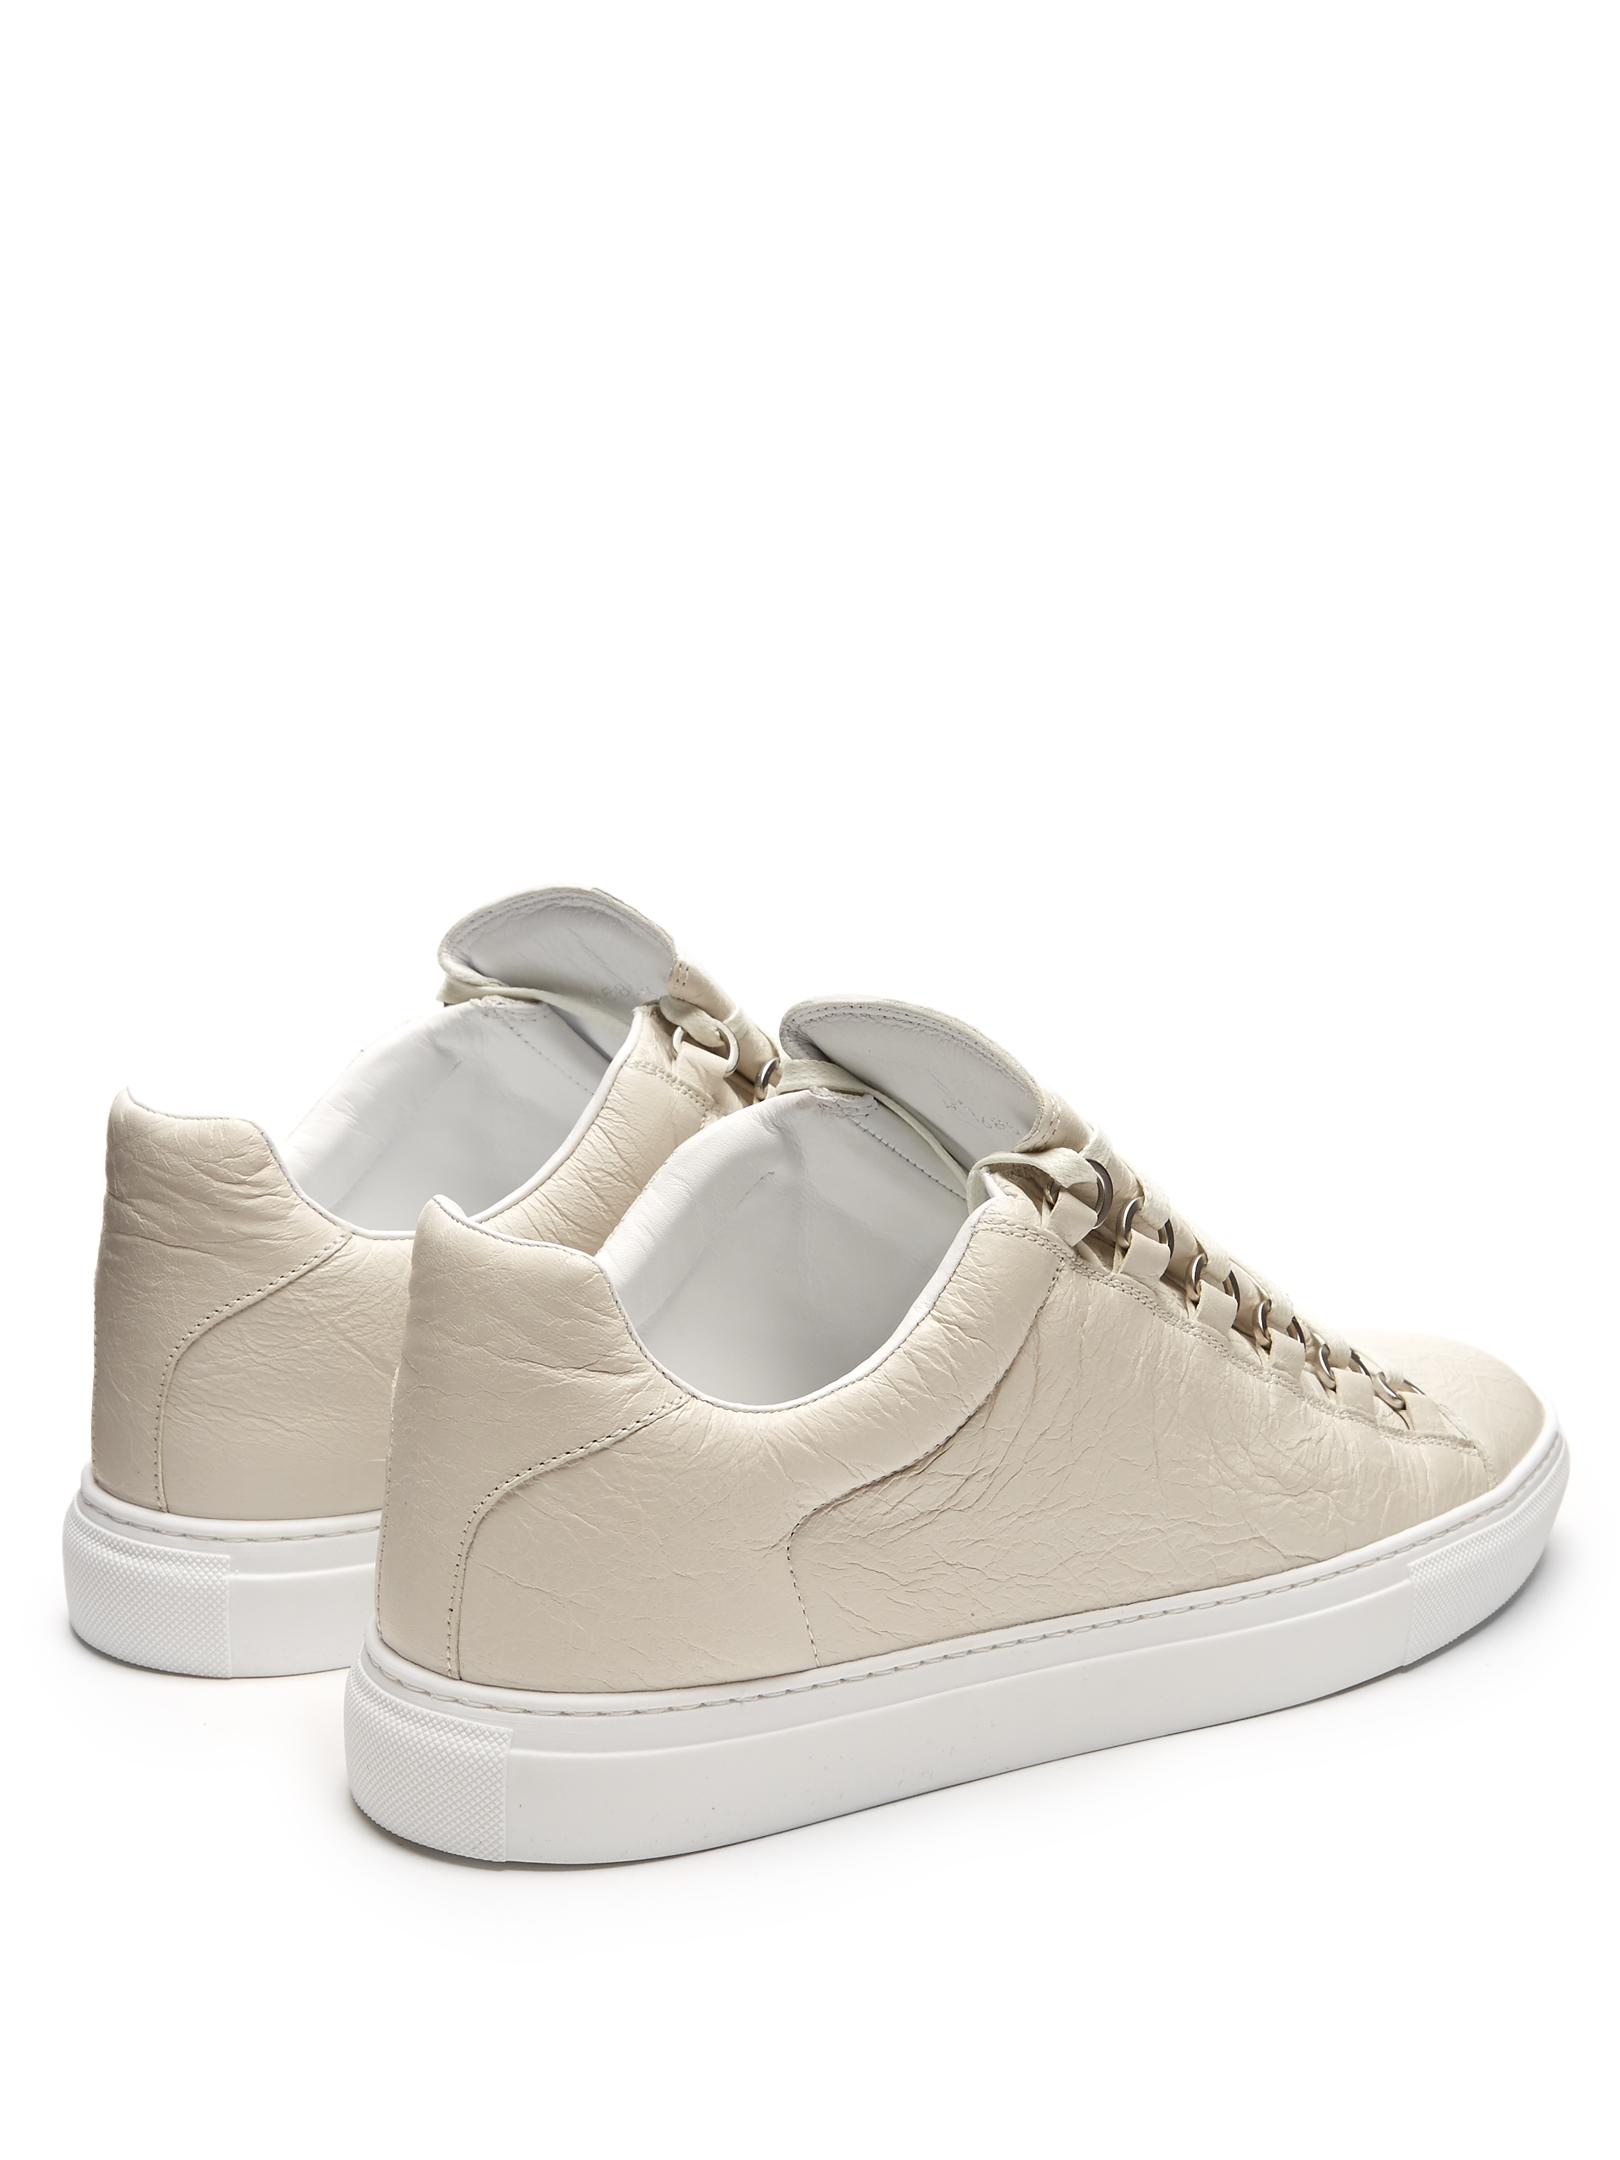 Learner saltet kultur Balenciaga Arena Low-top Leather Trainers in White for Men - Lyst